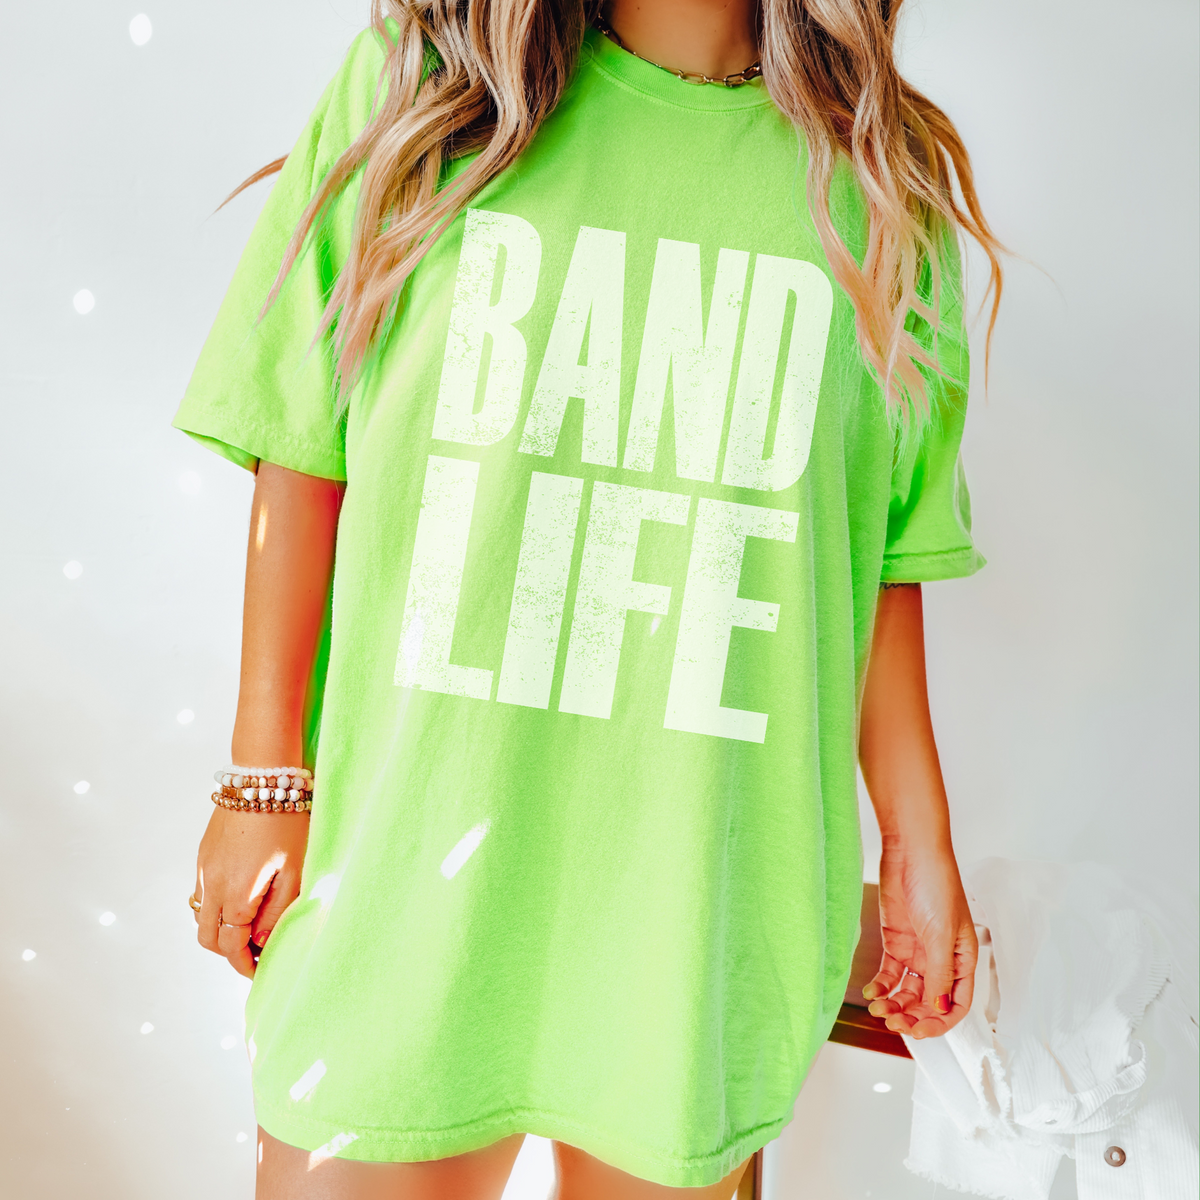 Band Life Super Faded Distressed White Digital Design, PNG